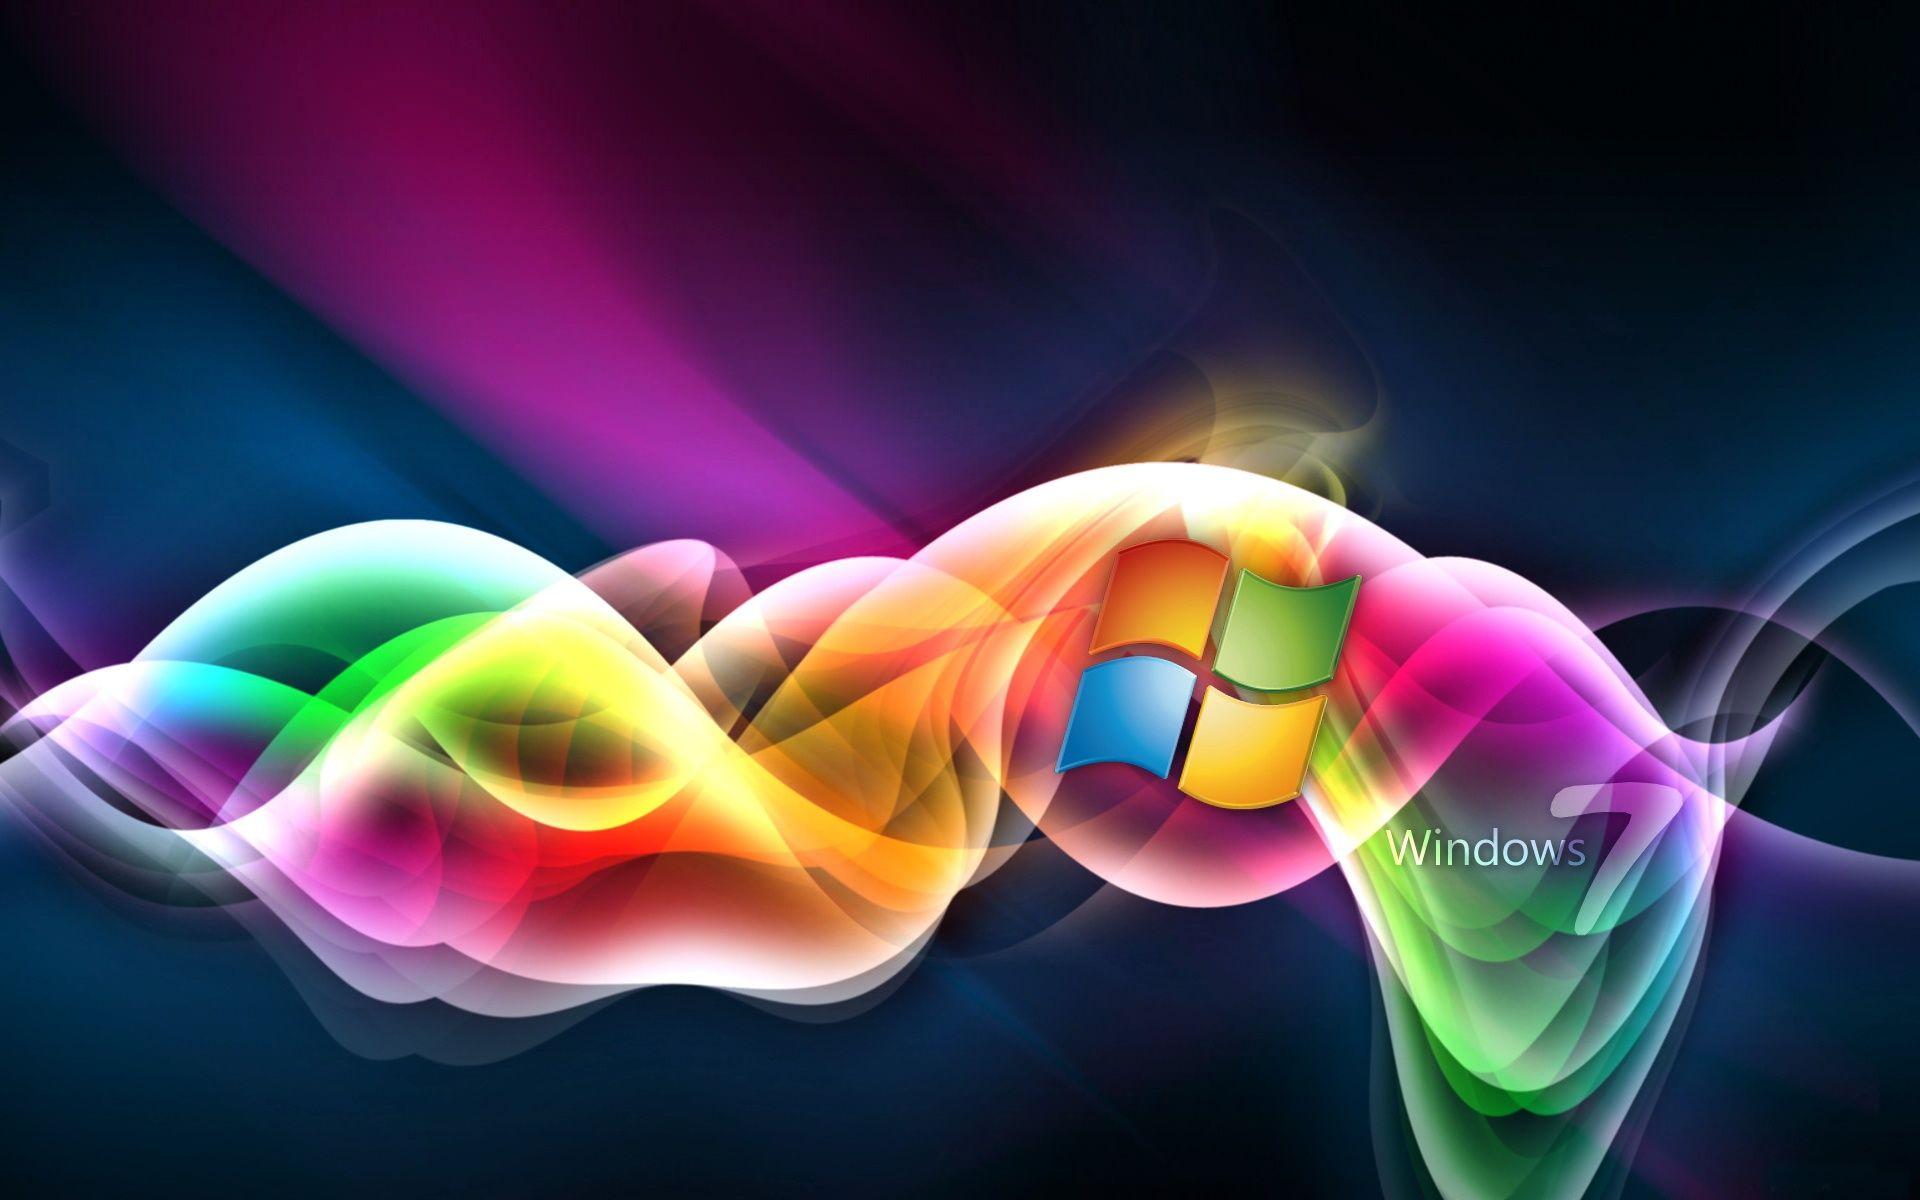 Free HD Wallpapers For Windows 7 - Wallpaper Cave